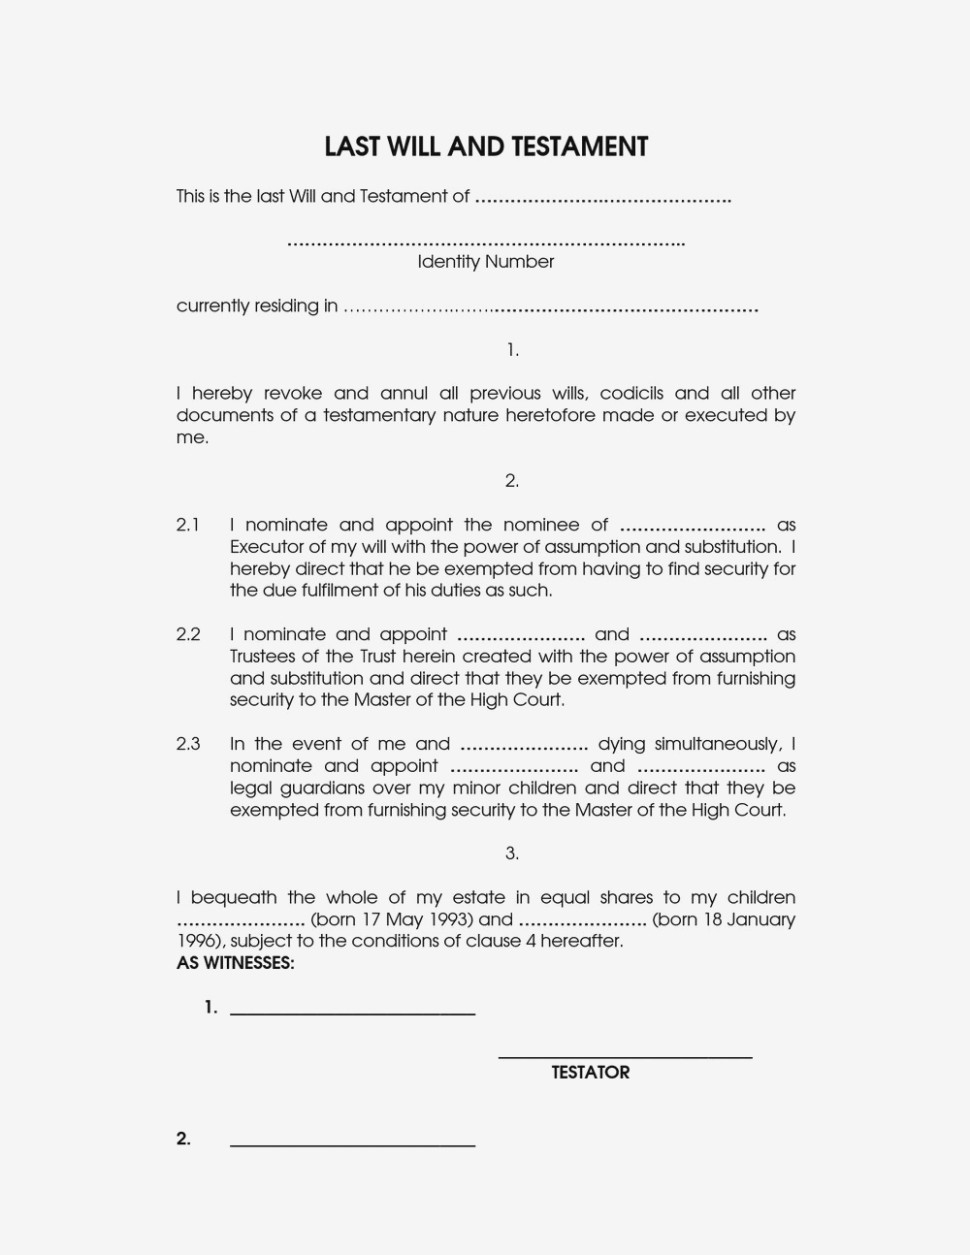 Free Printable Last Will And Testament Forms Uk | Resume Examples - Free Printable Last Will And Testament Forms